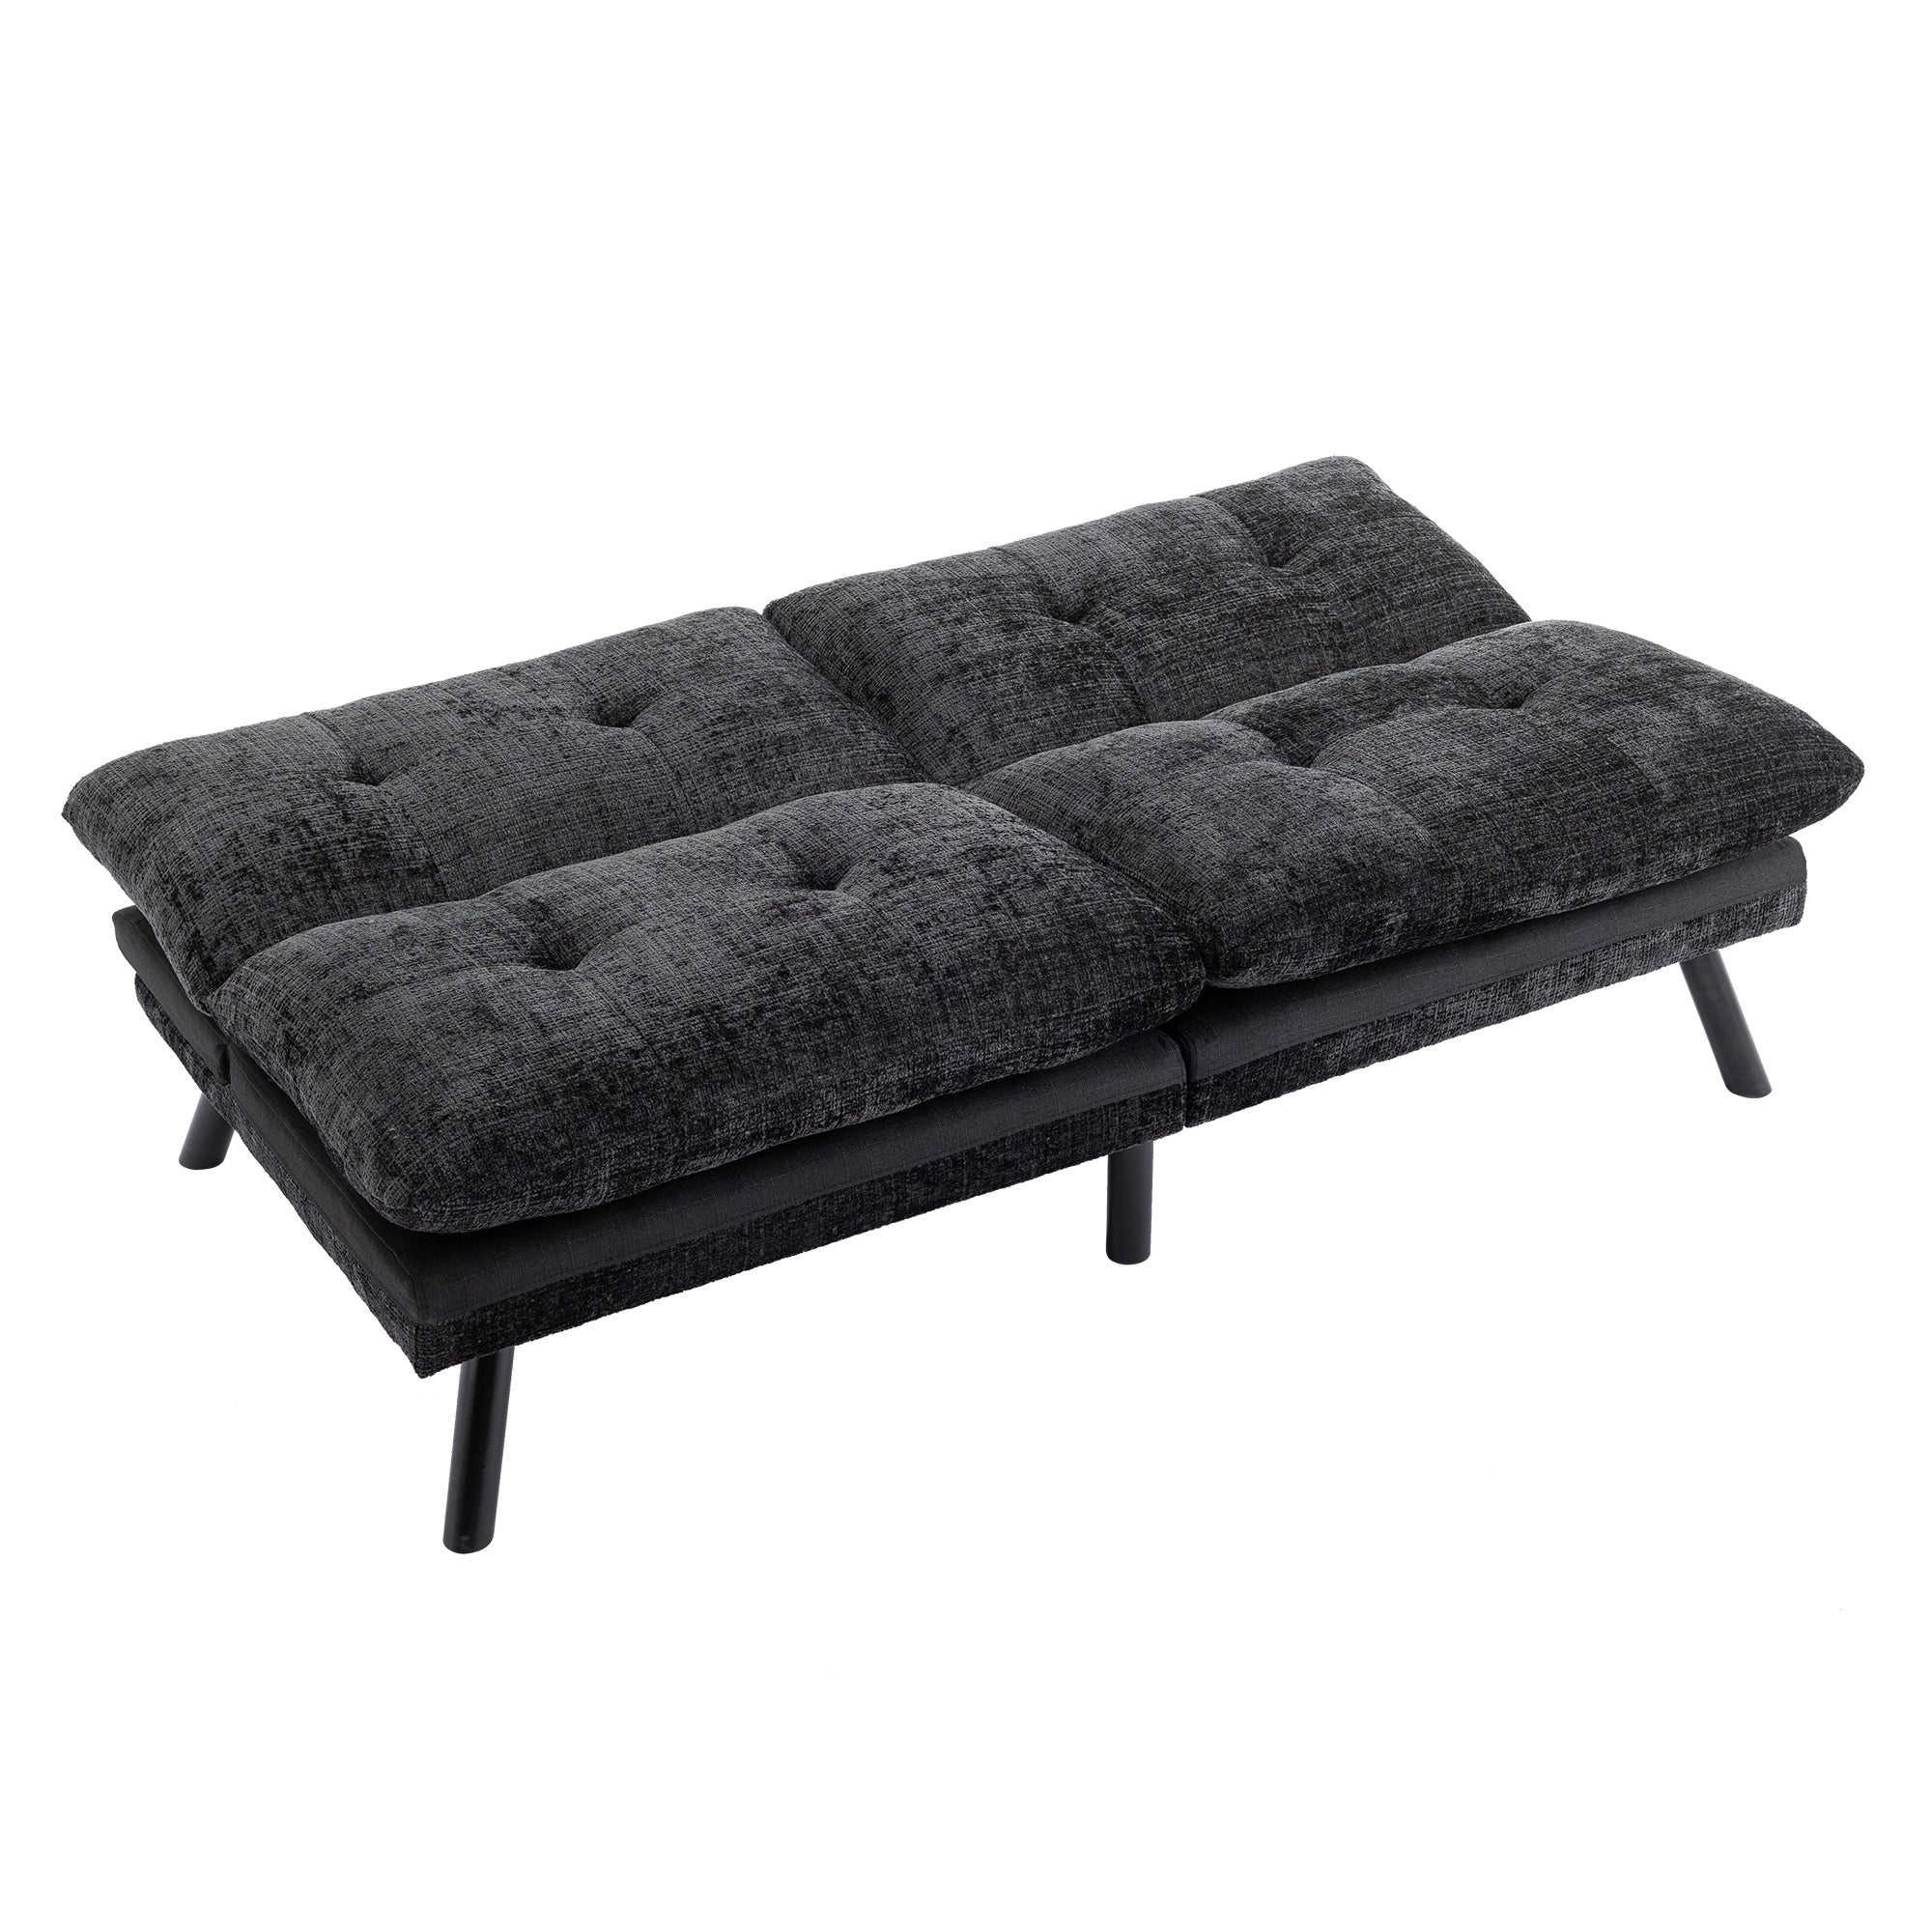 Convertible Sofa Bed  Loveseat Futon Bed Breathable Adjustable Lounge Couch with Metal Legs,Futon Sets for Compact Living Space  Chenille